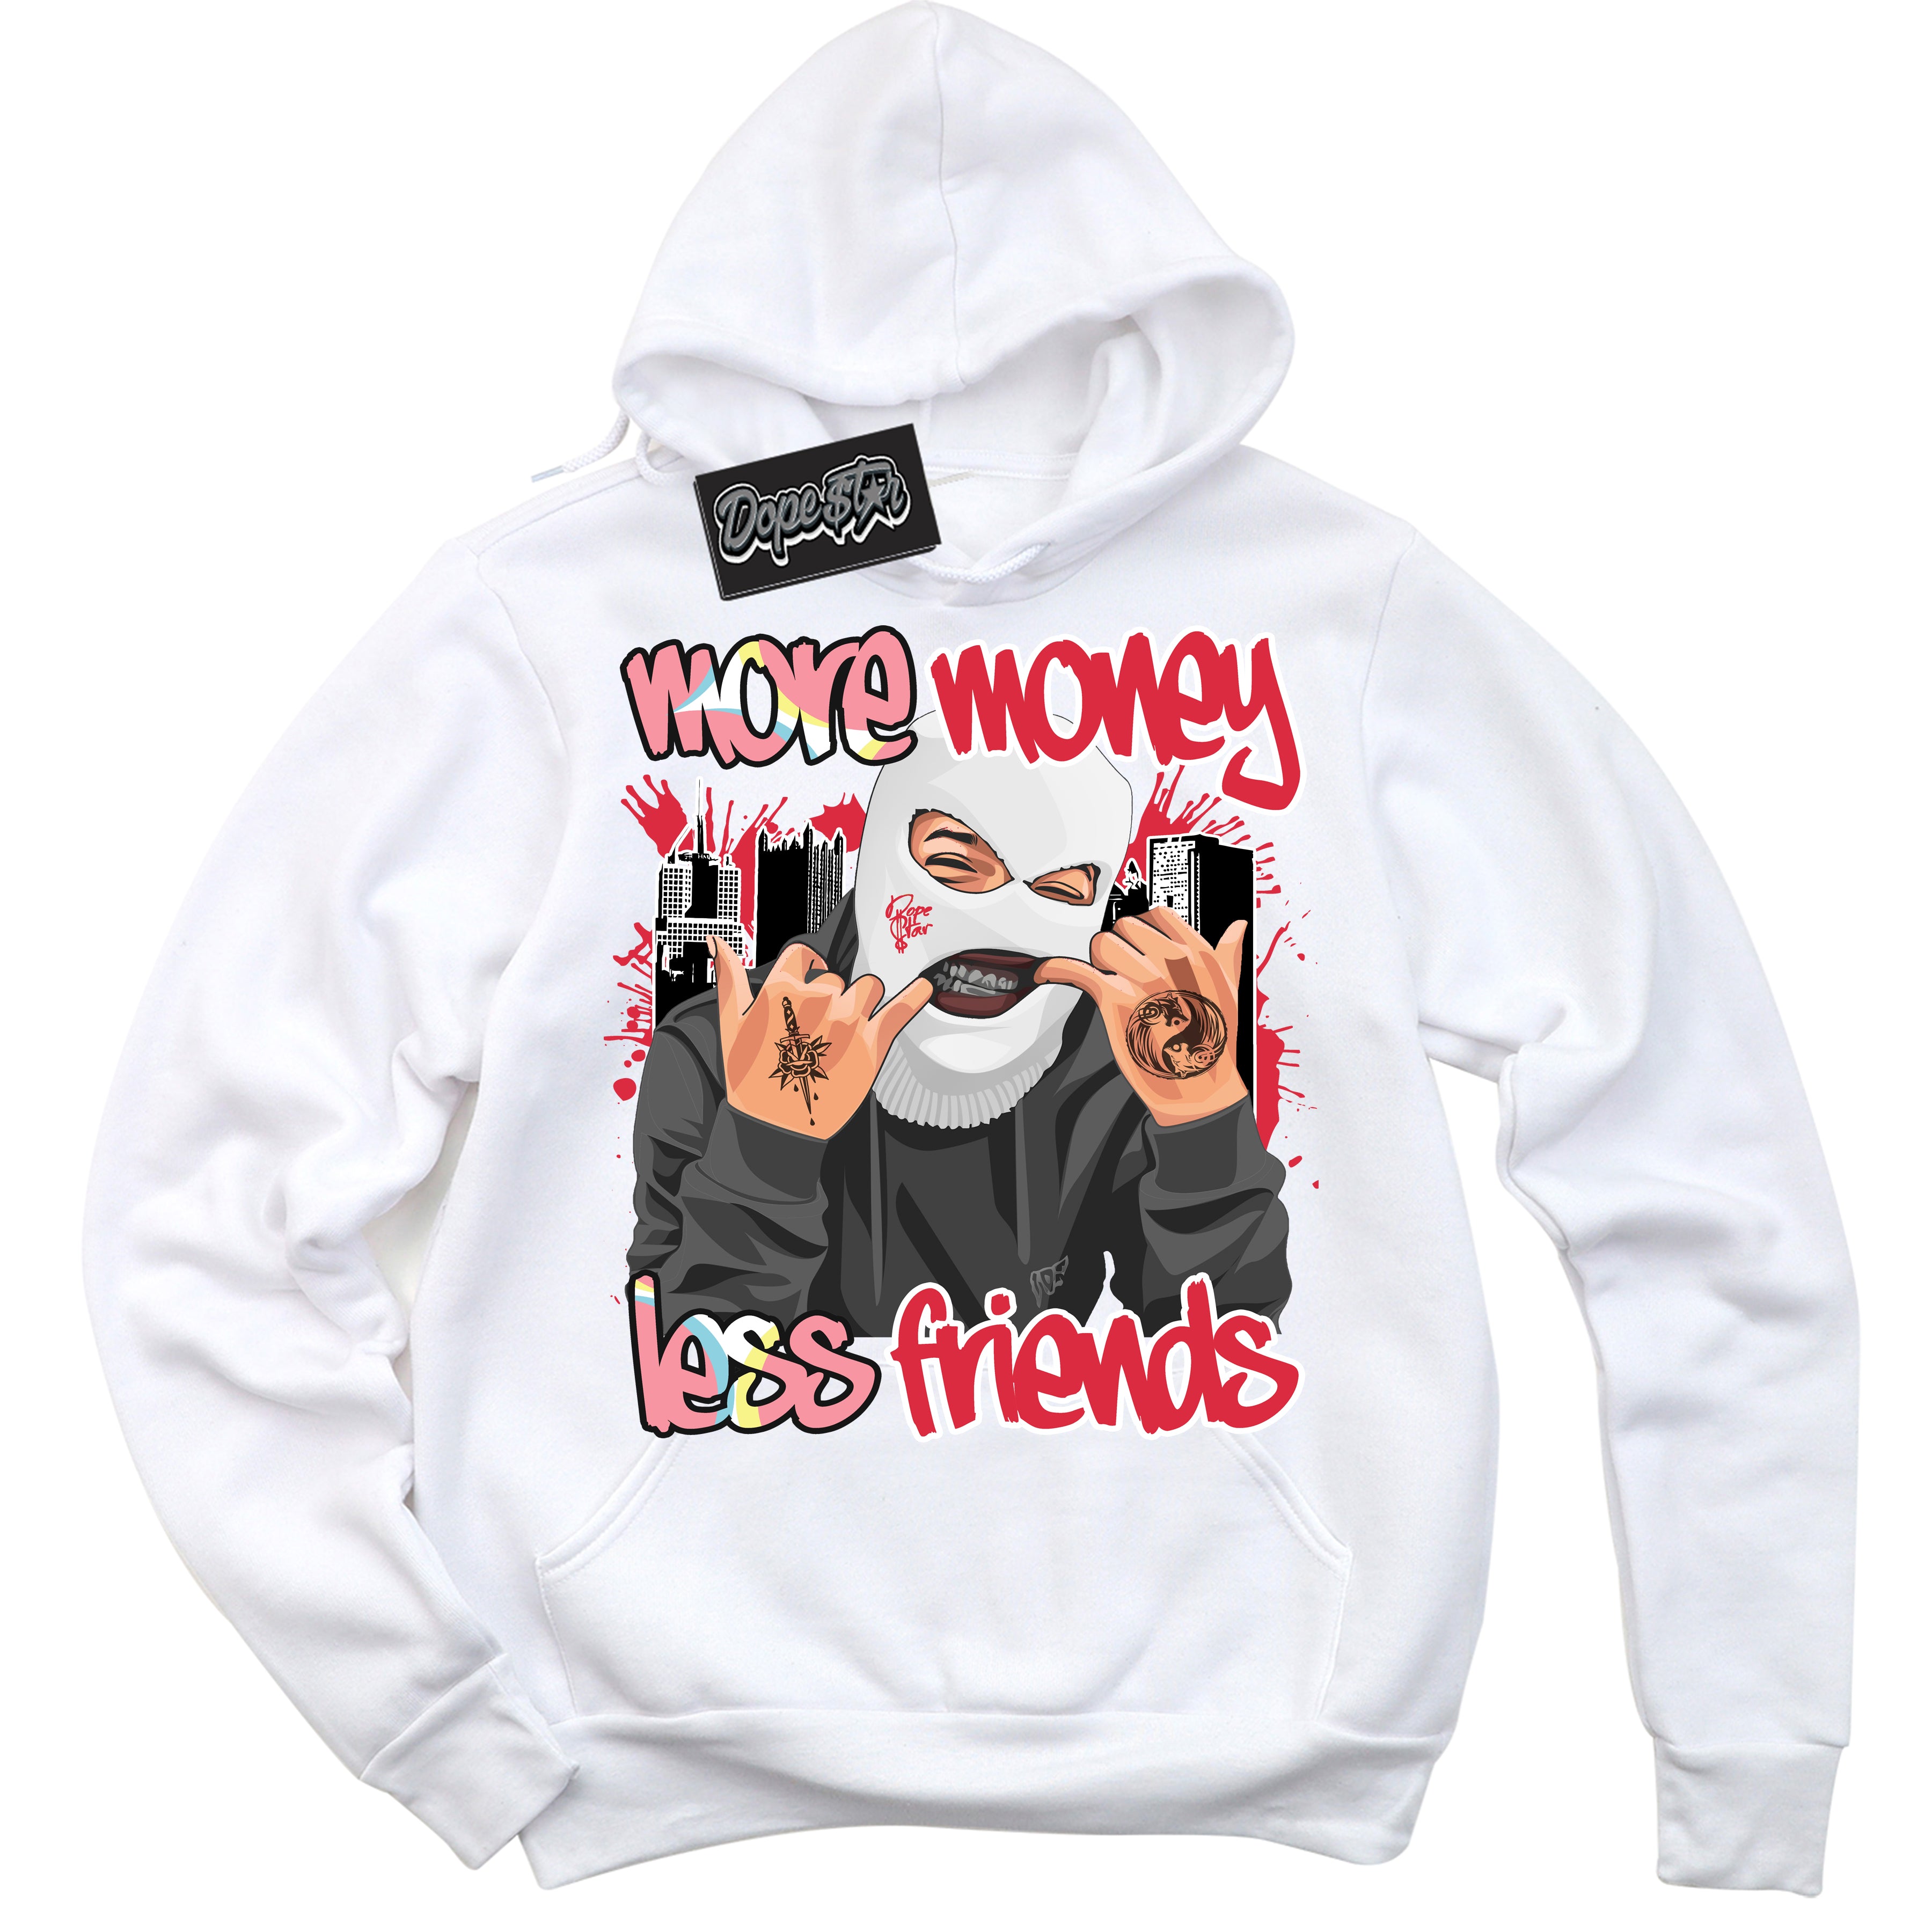 Cool White Graphic DopeStar Hoodie with “ More Money Less Friends “ print, that perfectly matches Spider-Verse 1s sneakers